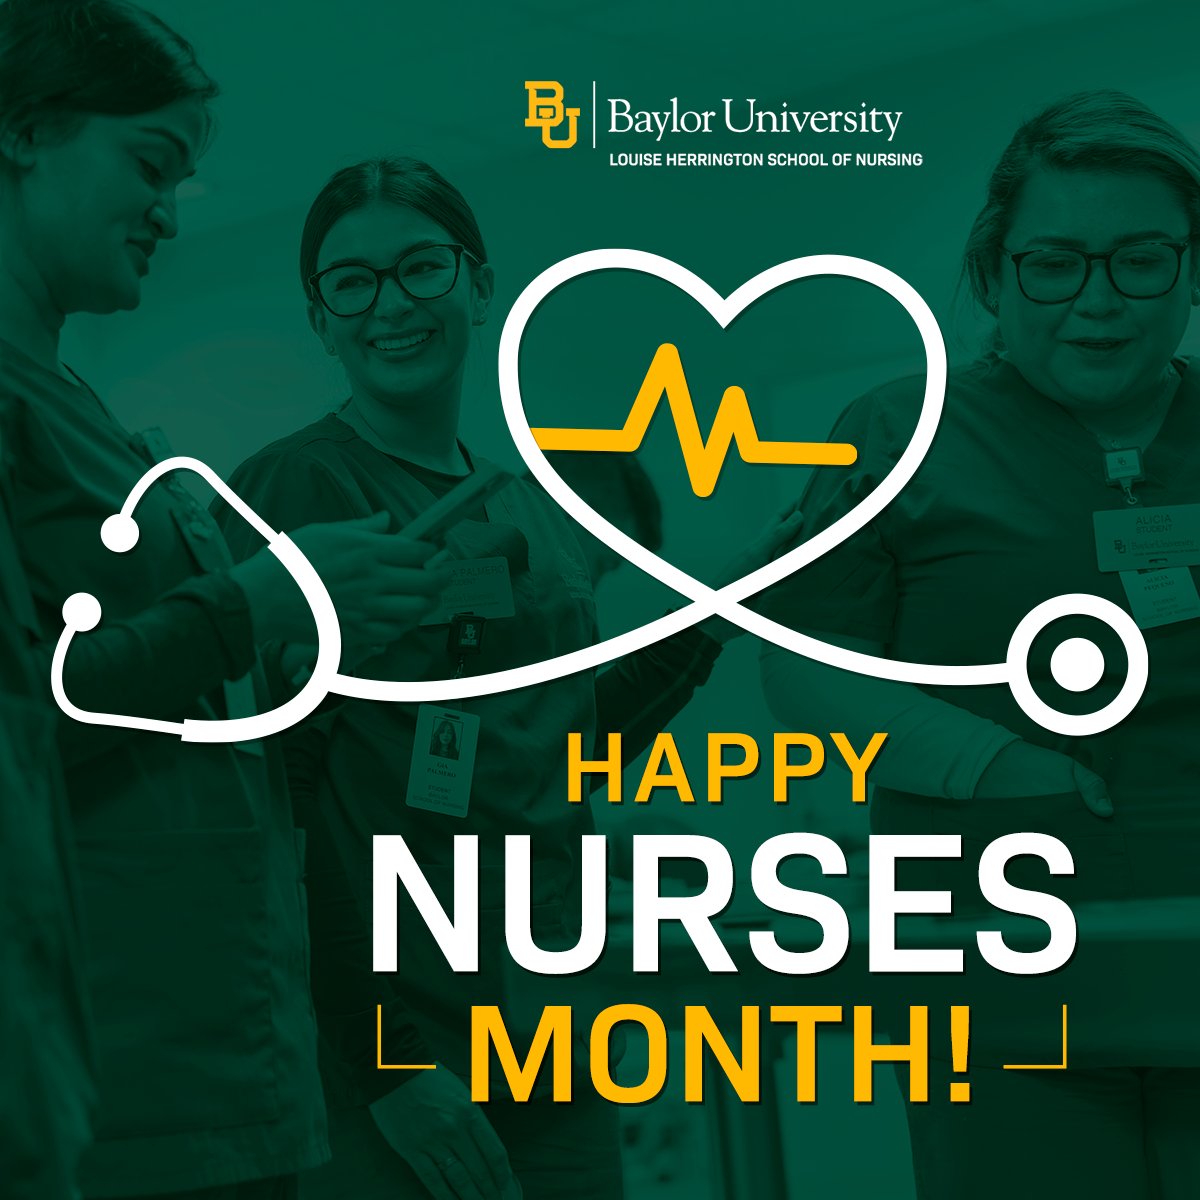 It's Nurse Appreciation Month! Let's fill the month with inspiration and recognize the incredible work of nurses! 
onlinenursing.baylor.edu/nurses-month
#NursesMonth #CelebrateNurses #LHSON #BaylorNurses